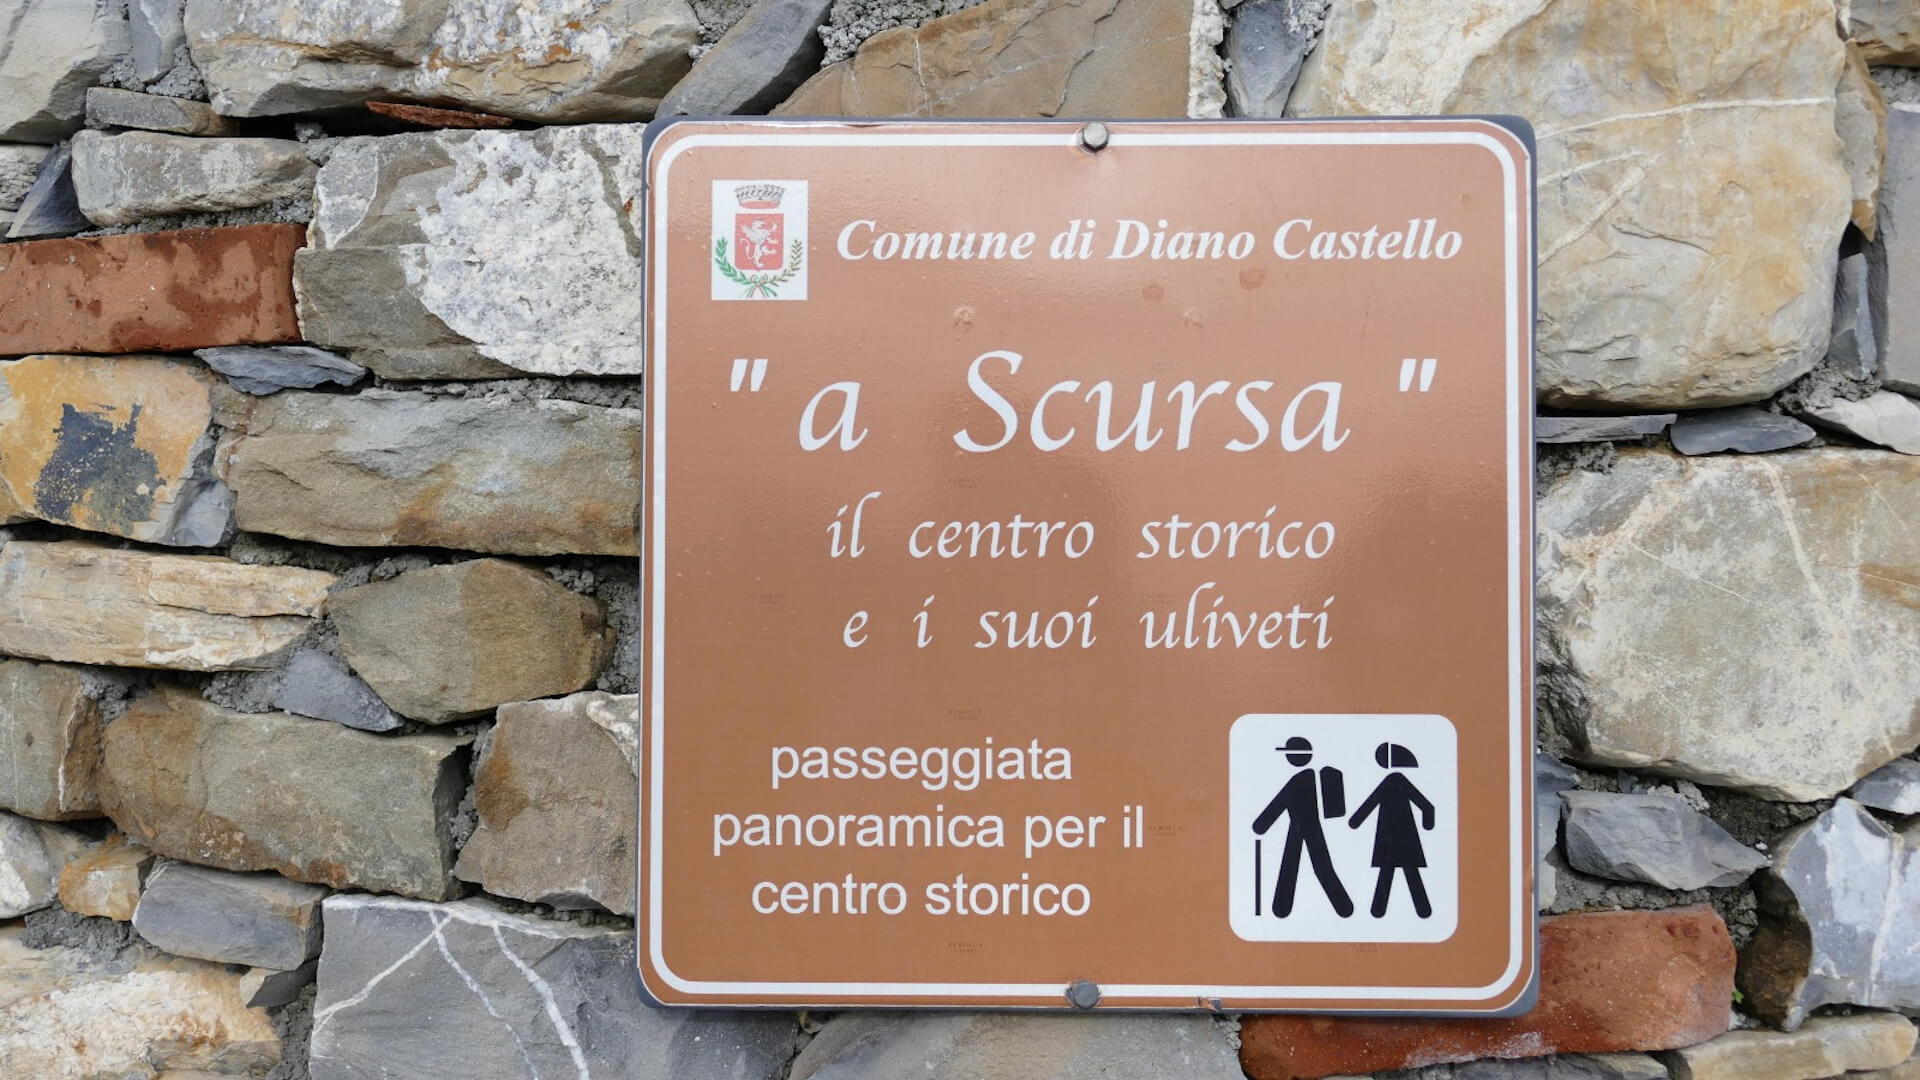 Hike along the mule tracks of Diano Castello 